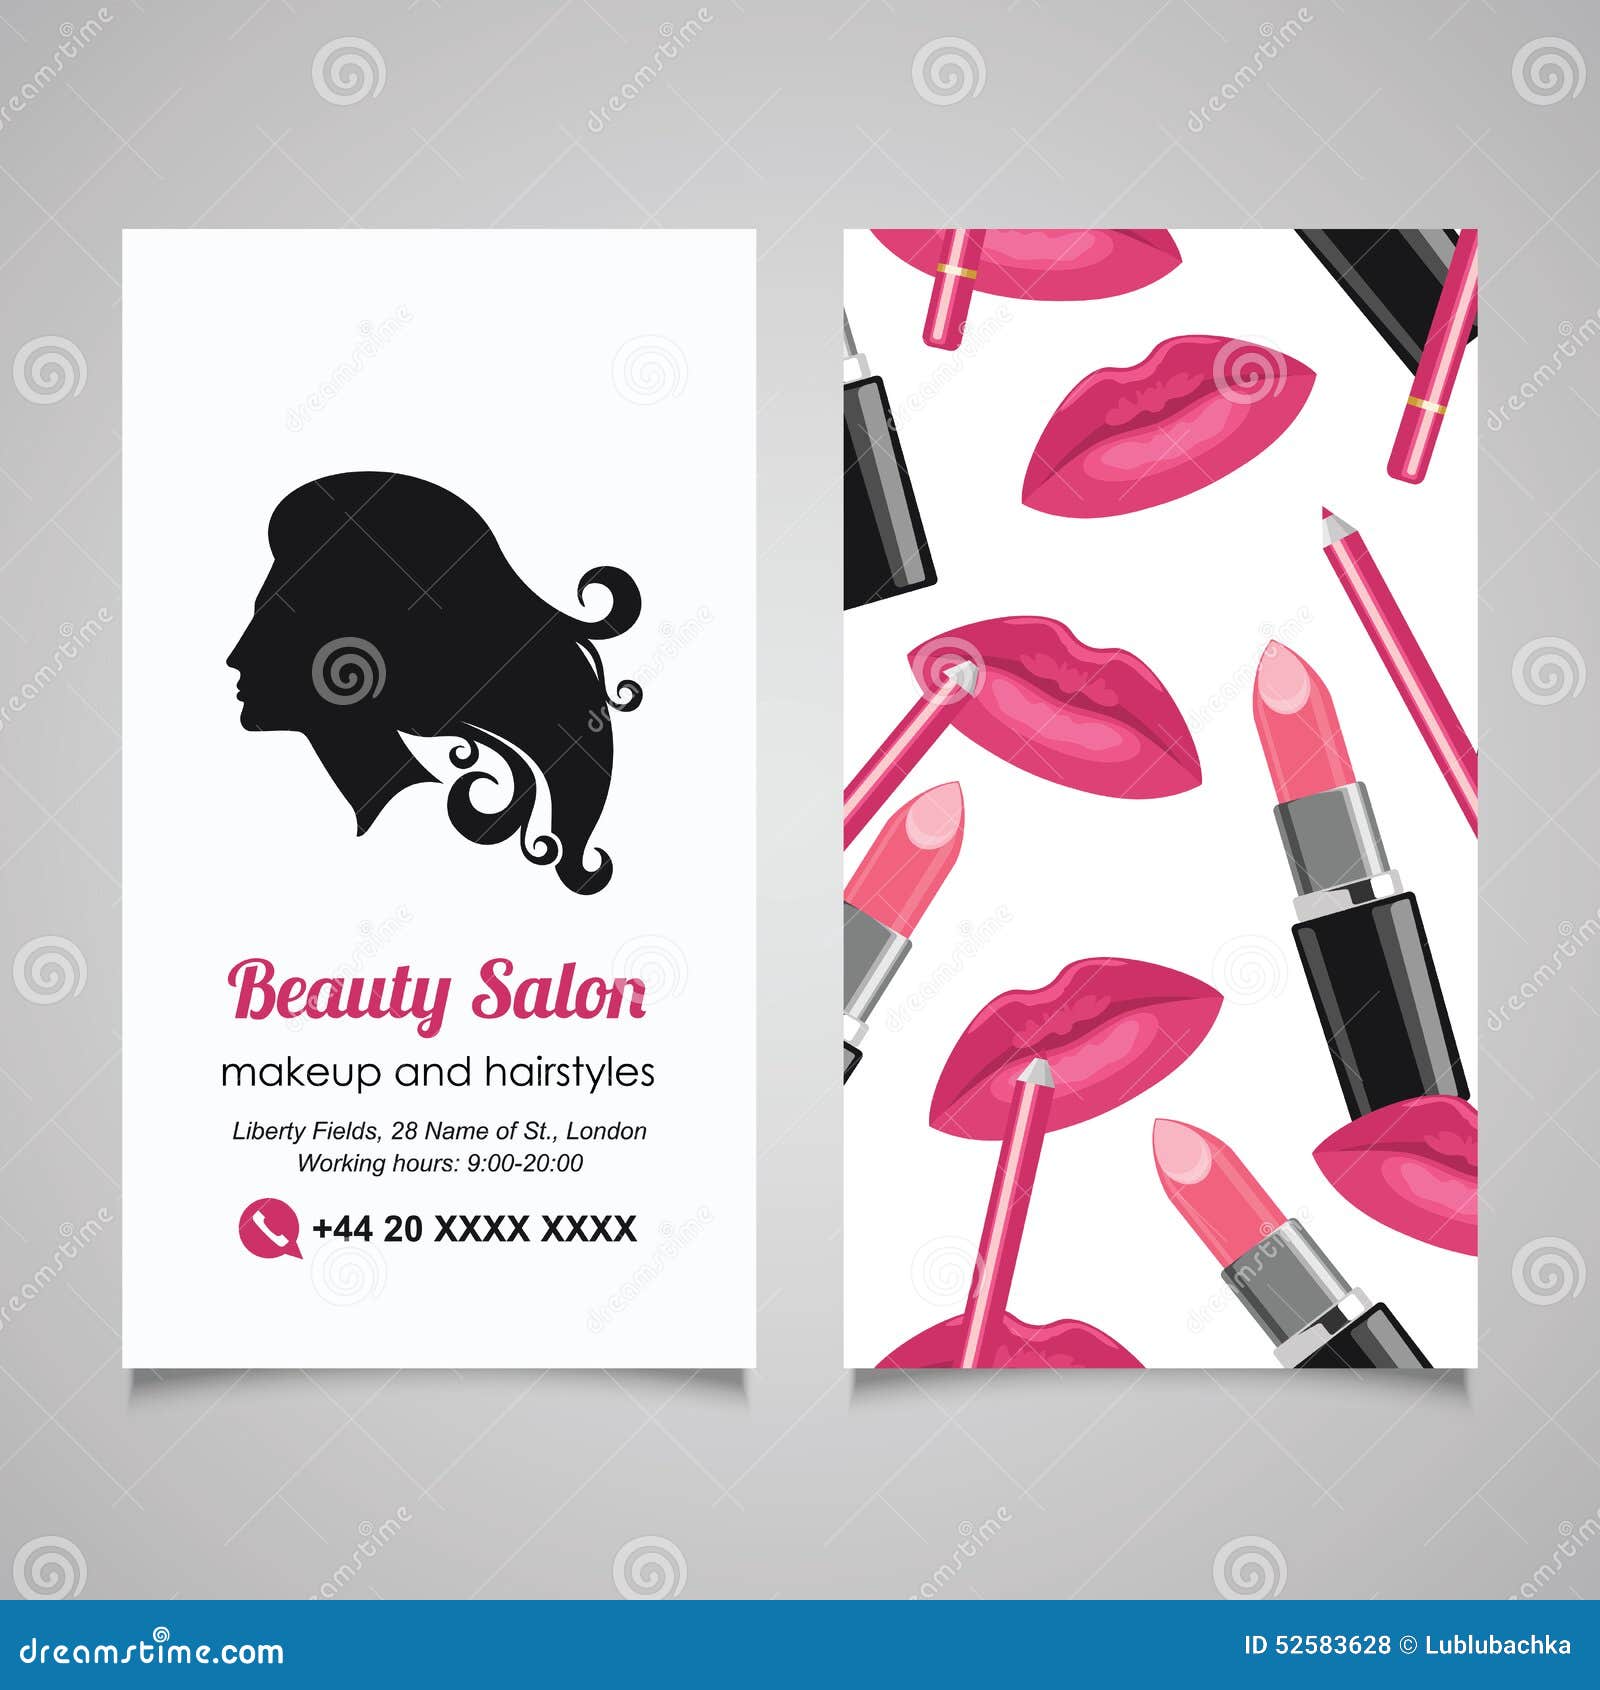 Beauty Salon Business Card Design Template with Beautiful Woman Stock  Vector - Illustration of liner, icon: 52583628